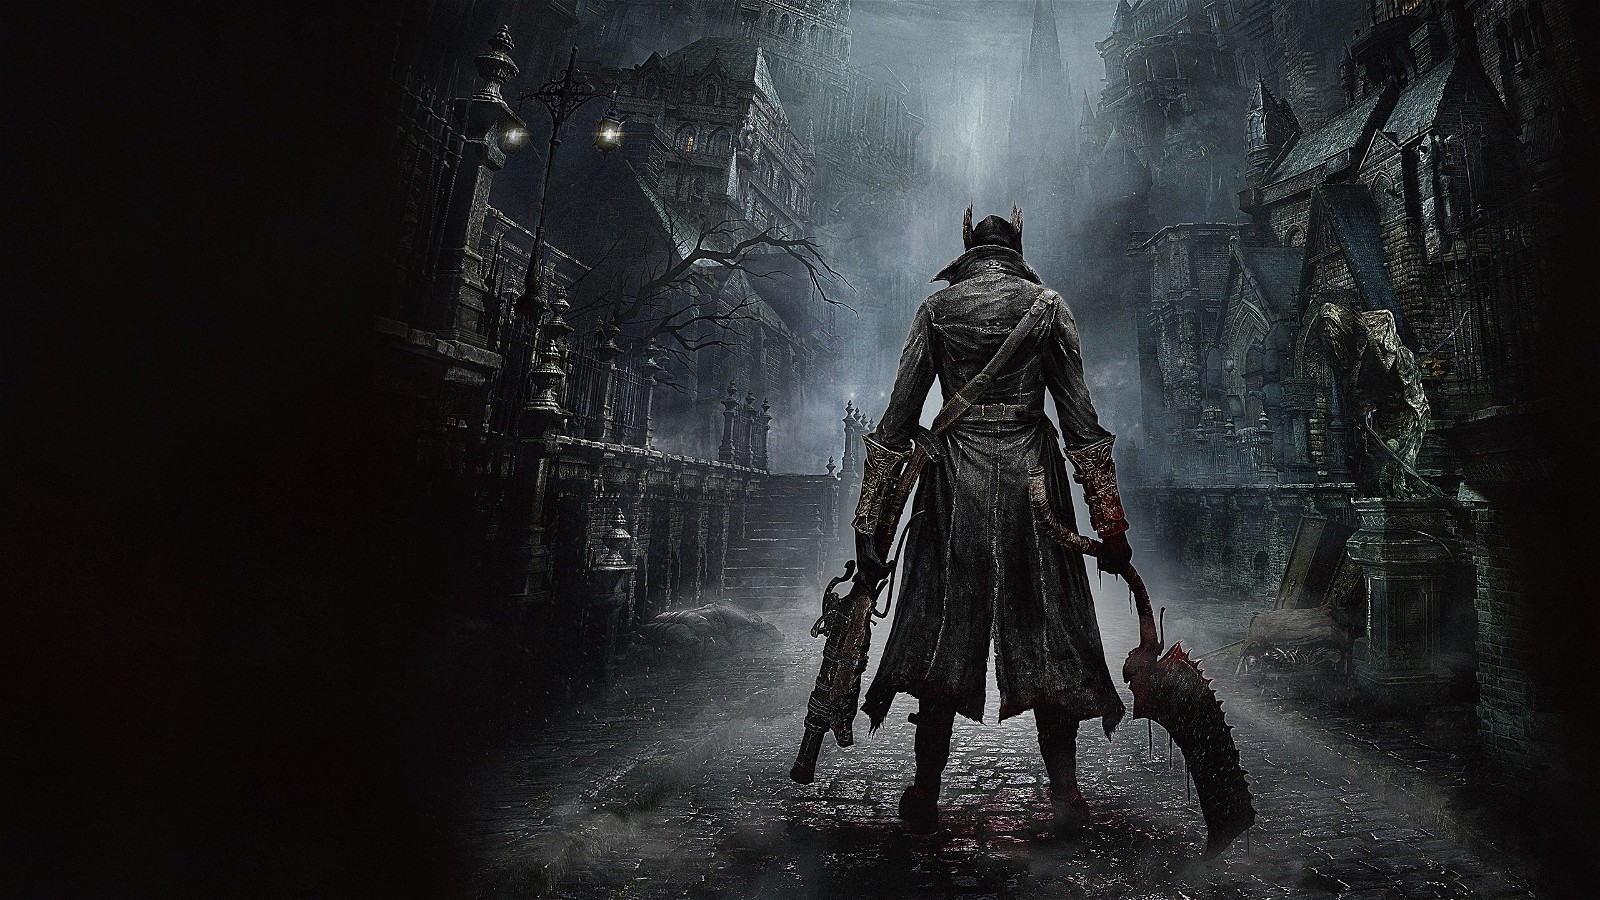 Bloodborne continues to impress fans.